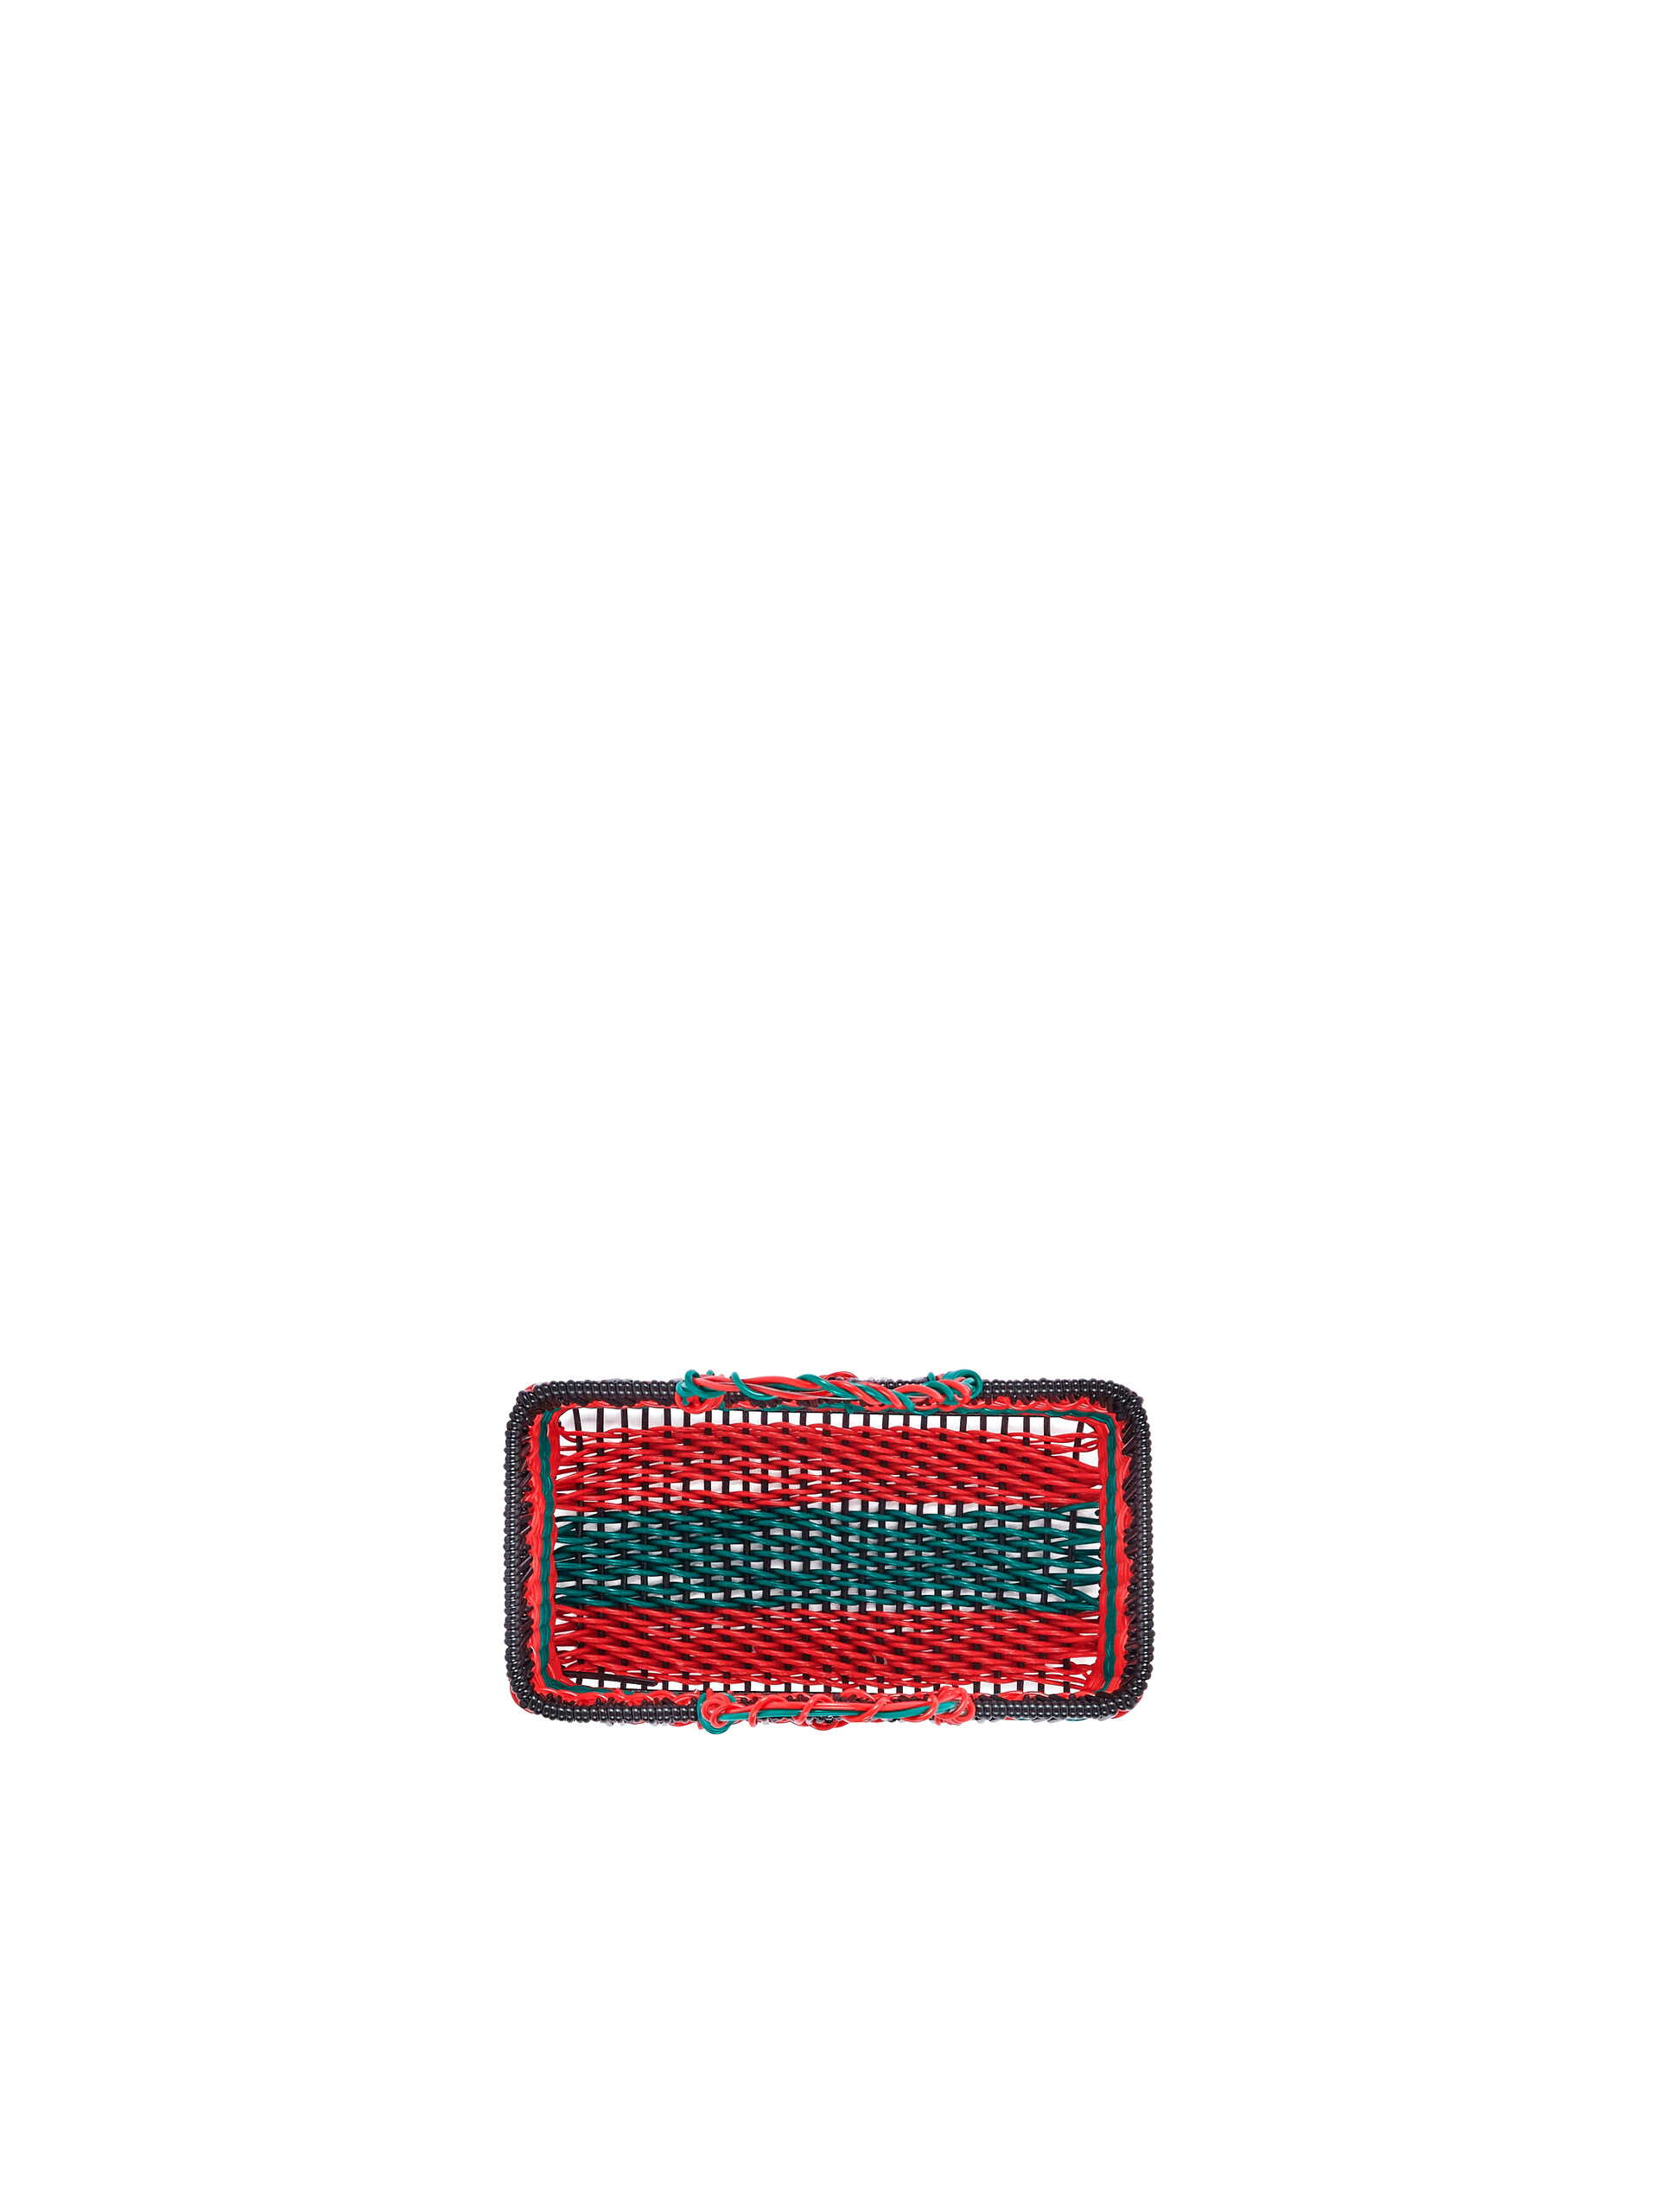 MARNI MARKET basket in iron and green and red PVC - Home Accessories - Image 4